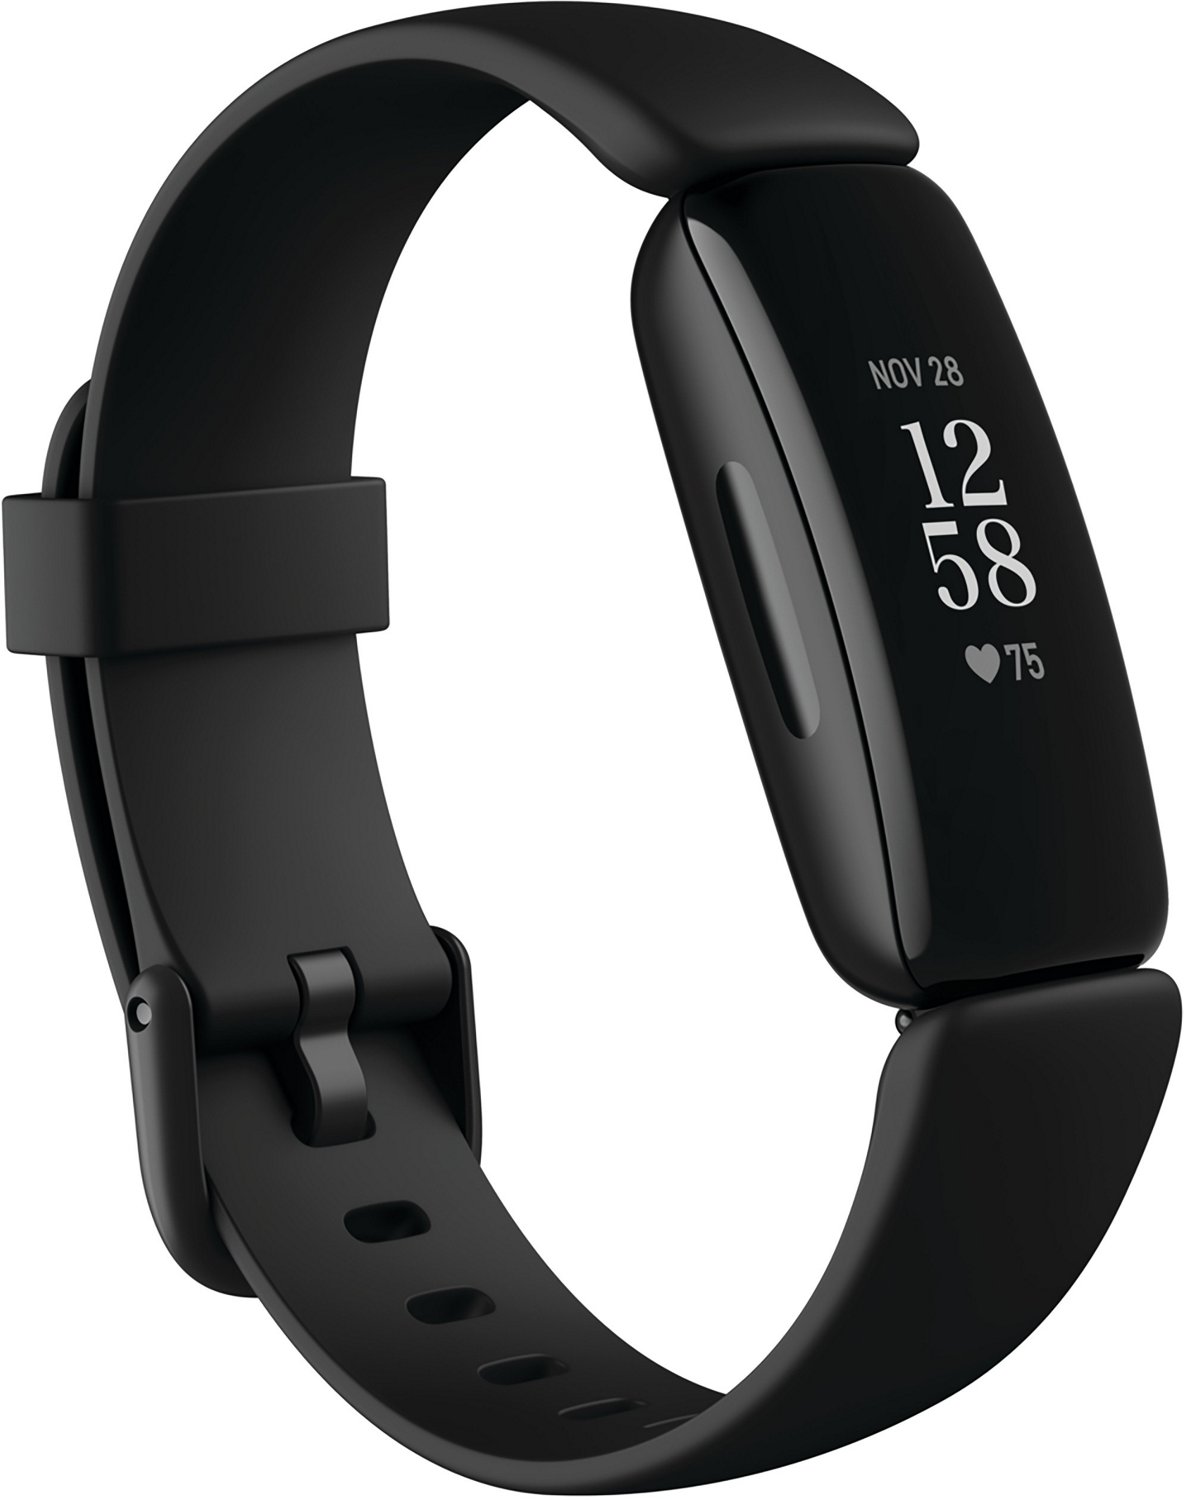 Fitbit Inspire 2 Fitness Tracker | Academy